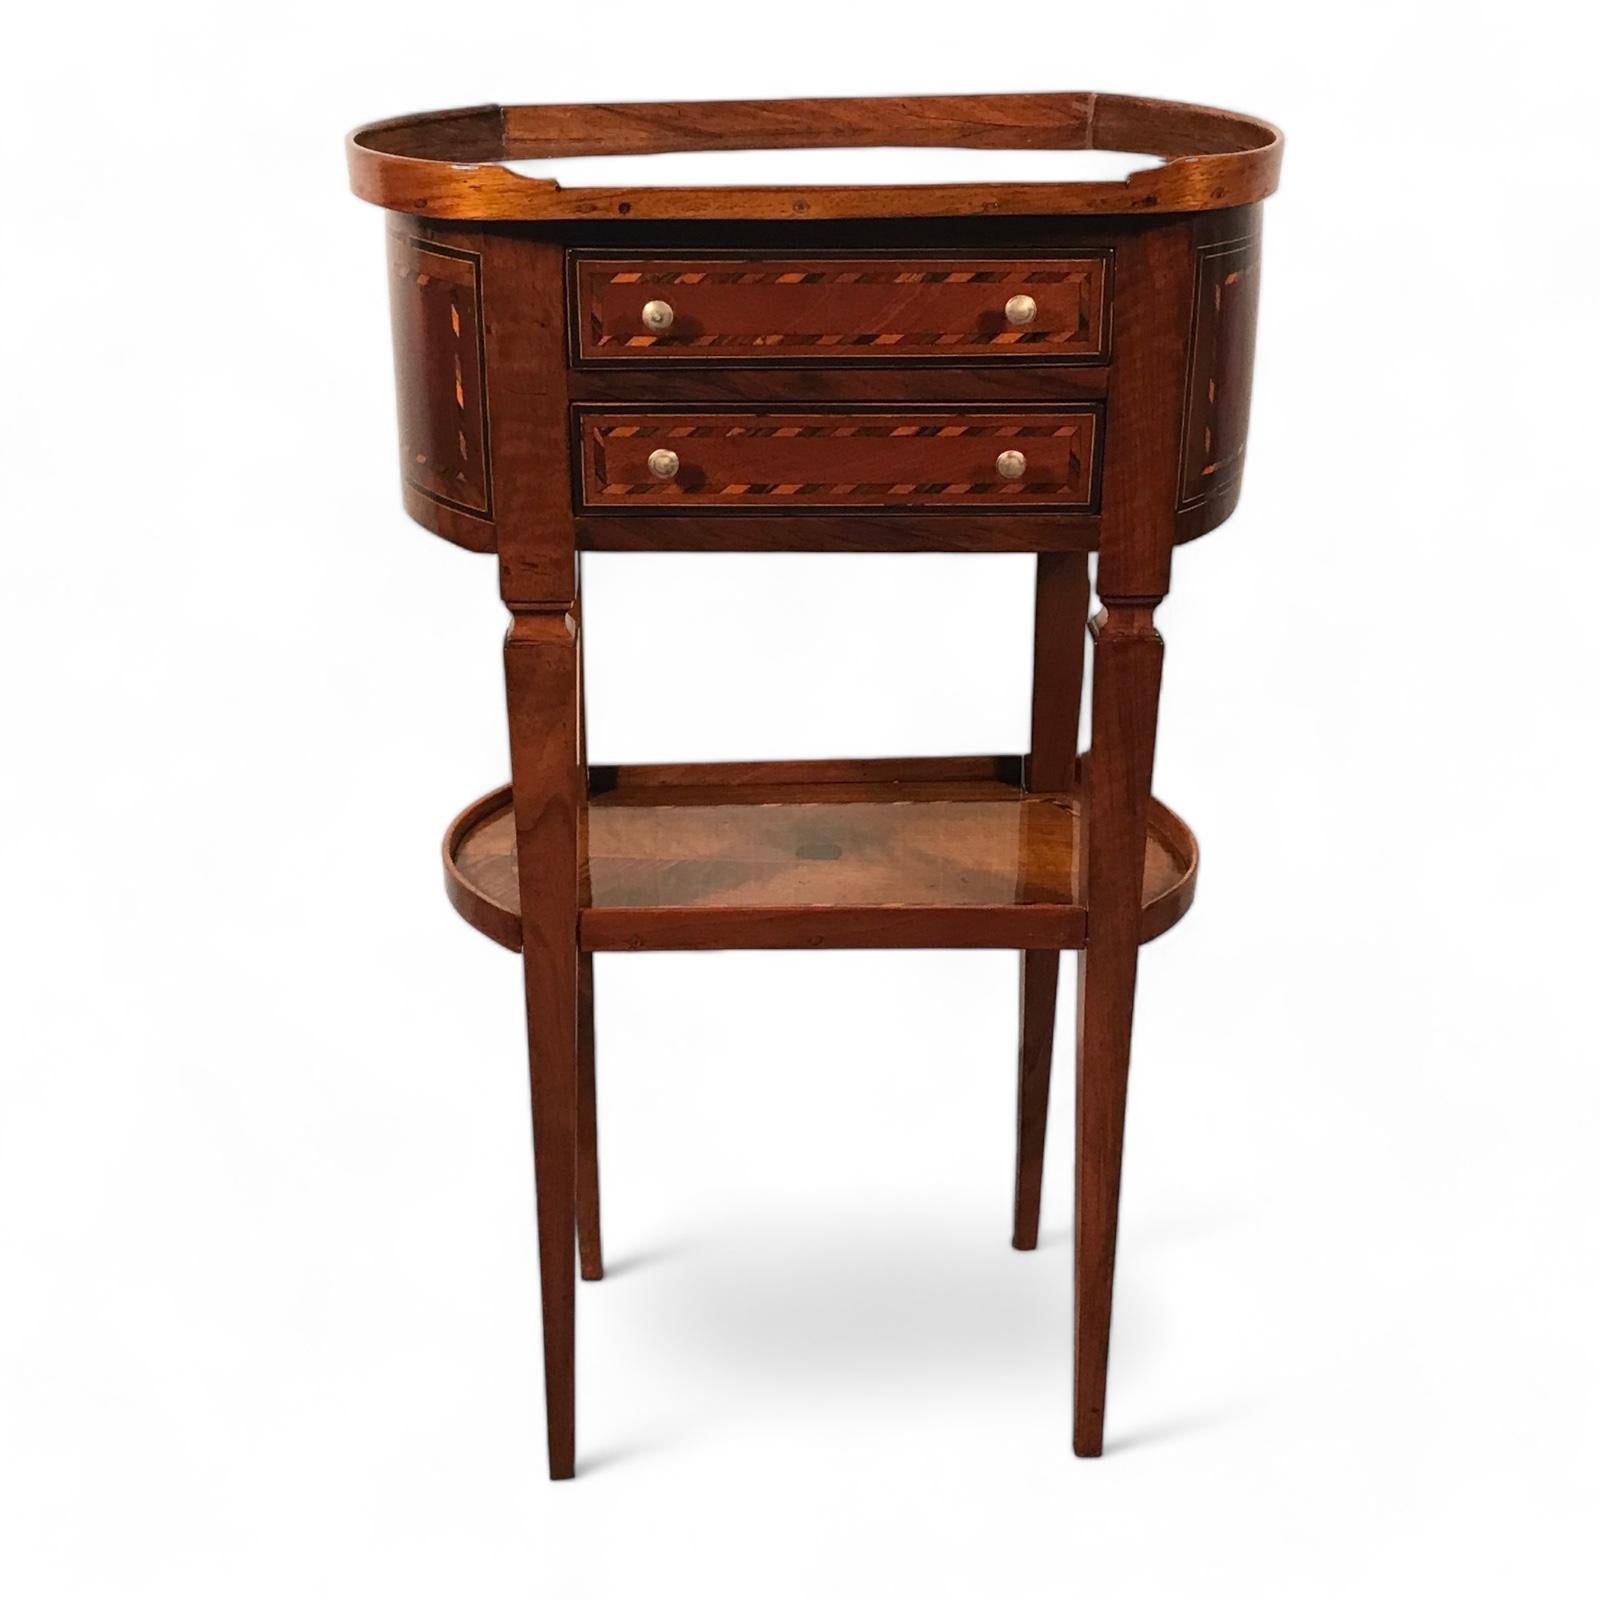 German Antique Louis XVI Side Table with Walnut Veneer and Marquetry Detailing For Sale